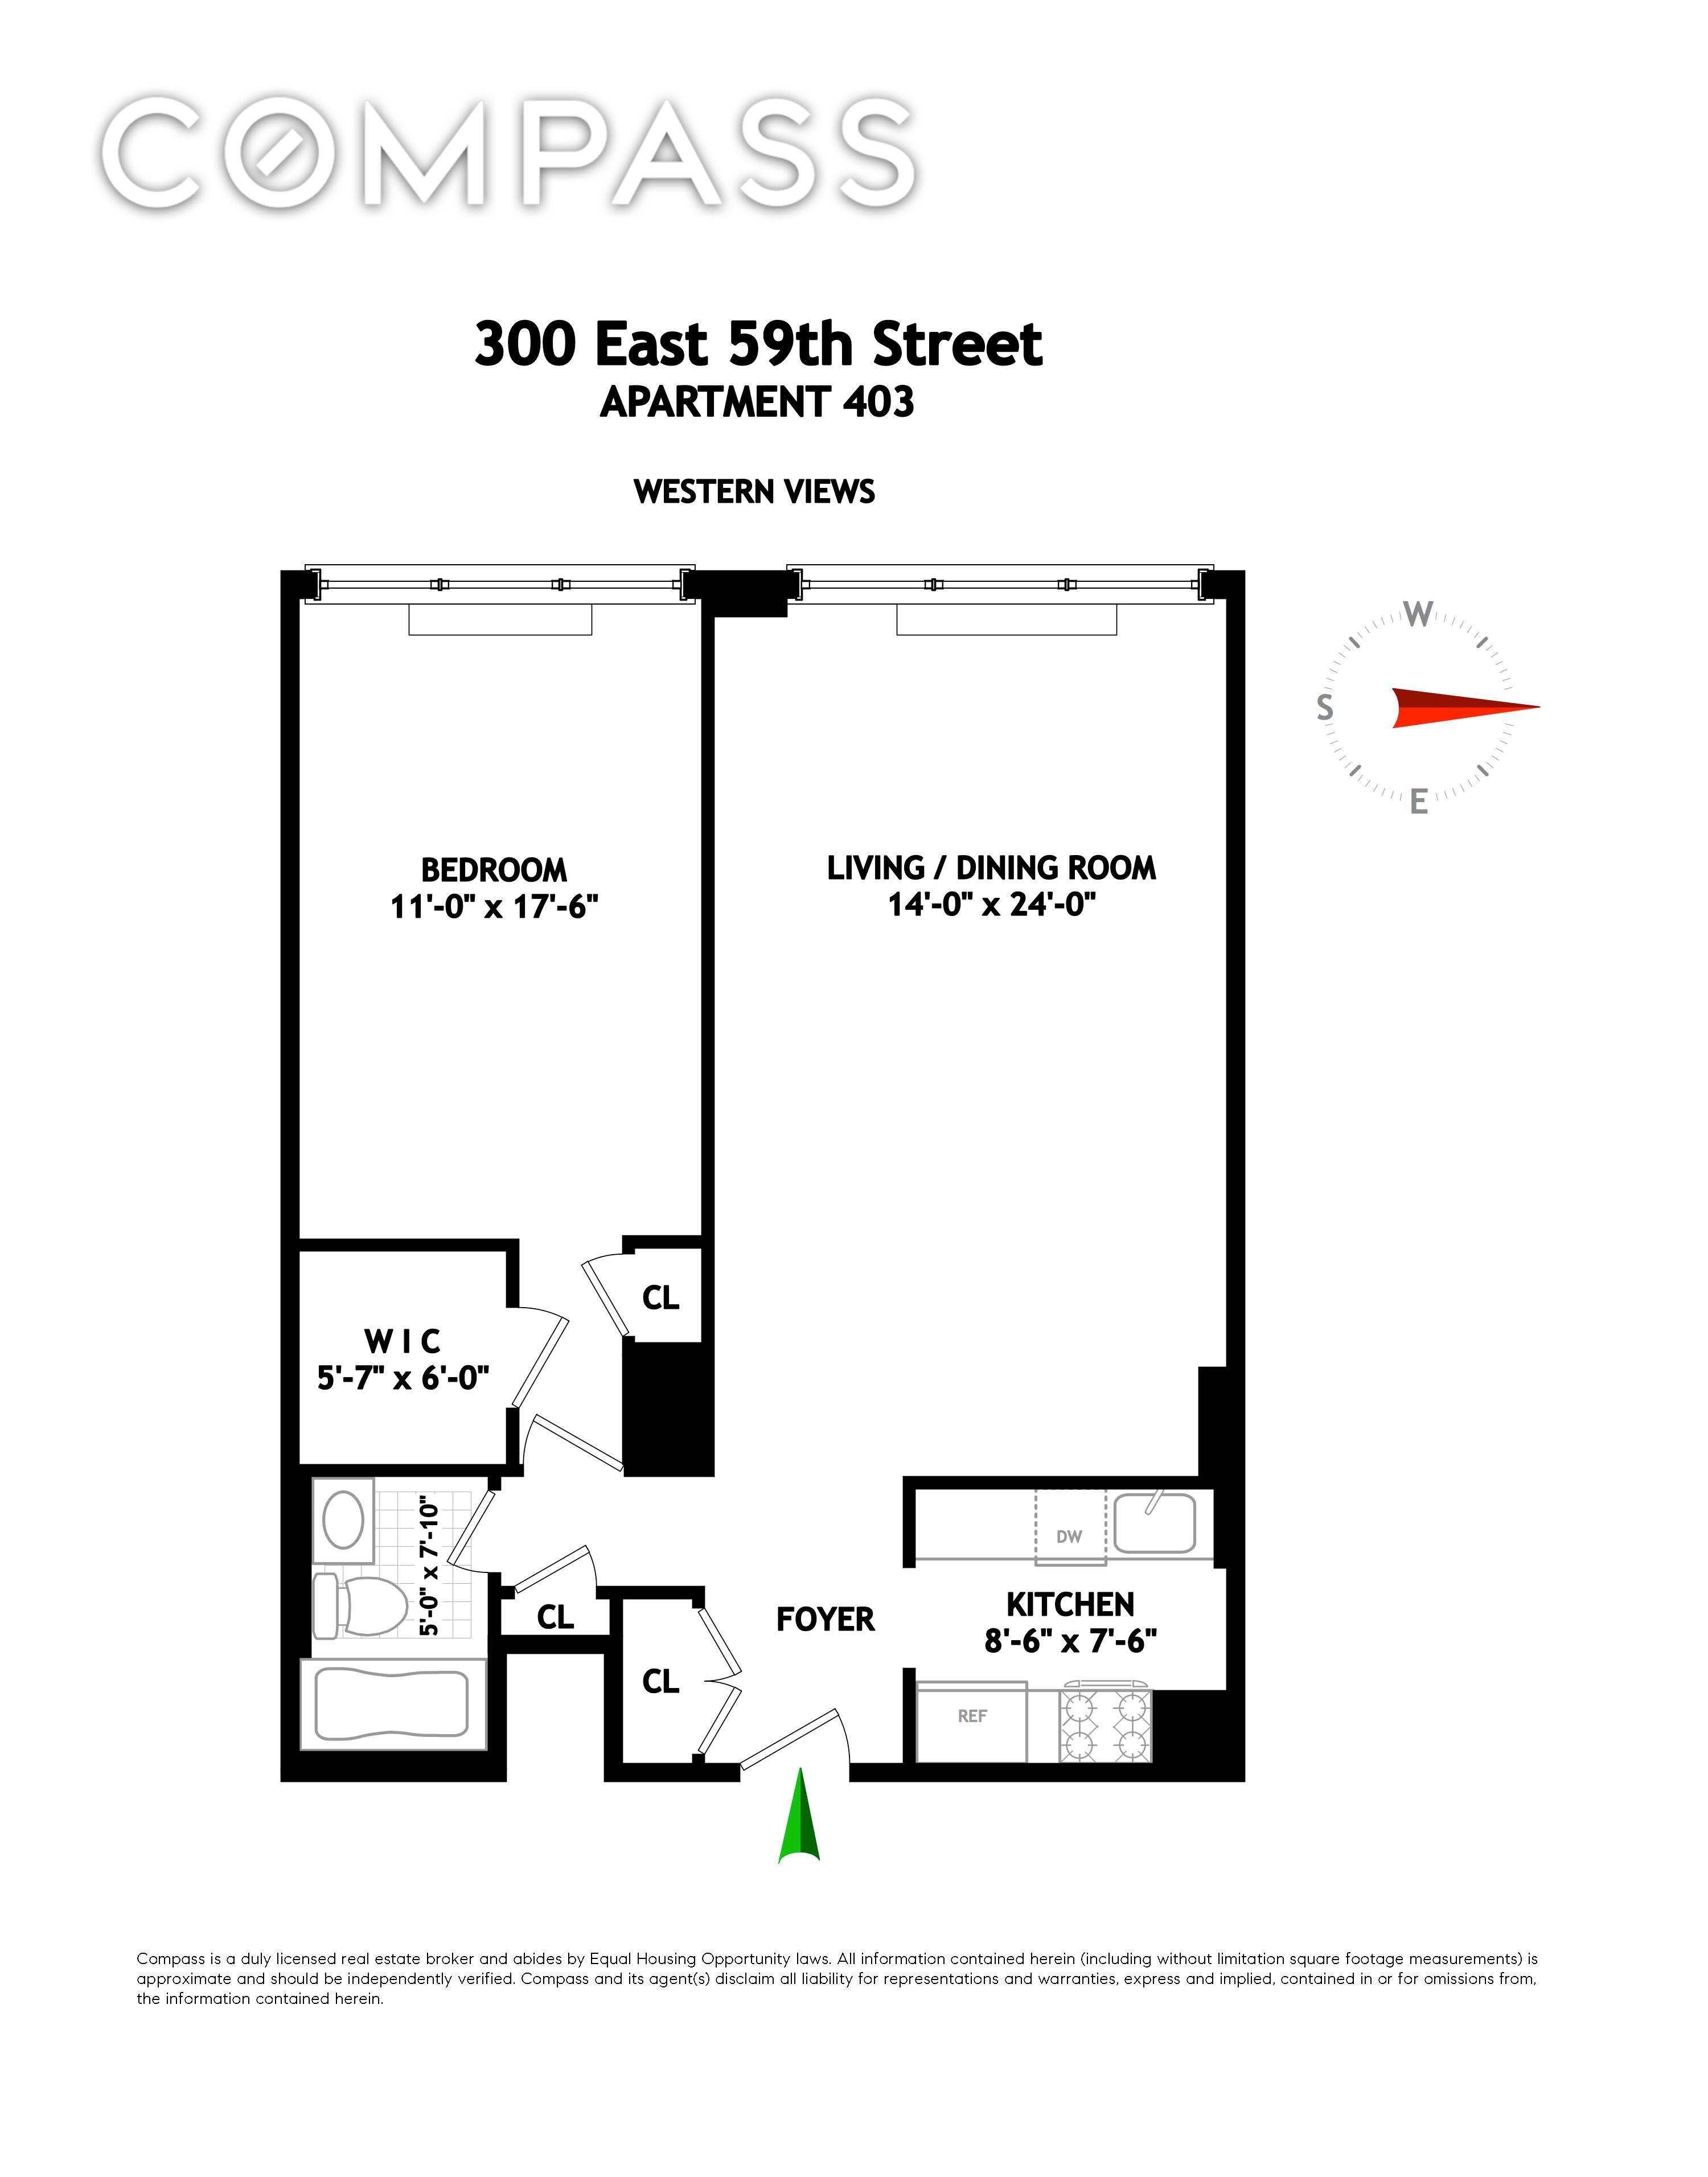 300 East 59th Street Sutton Place New York NY 10022